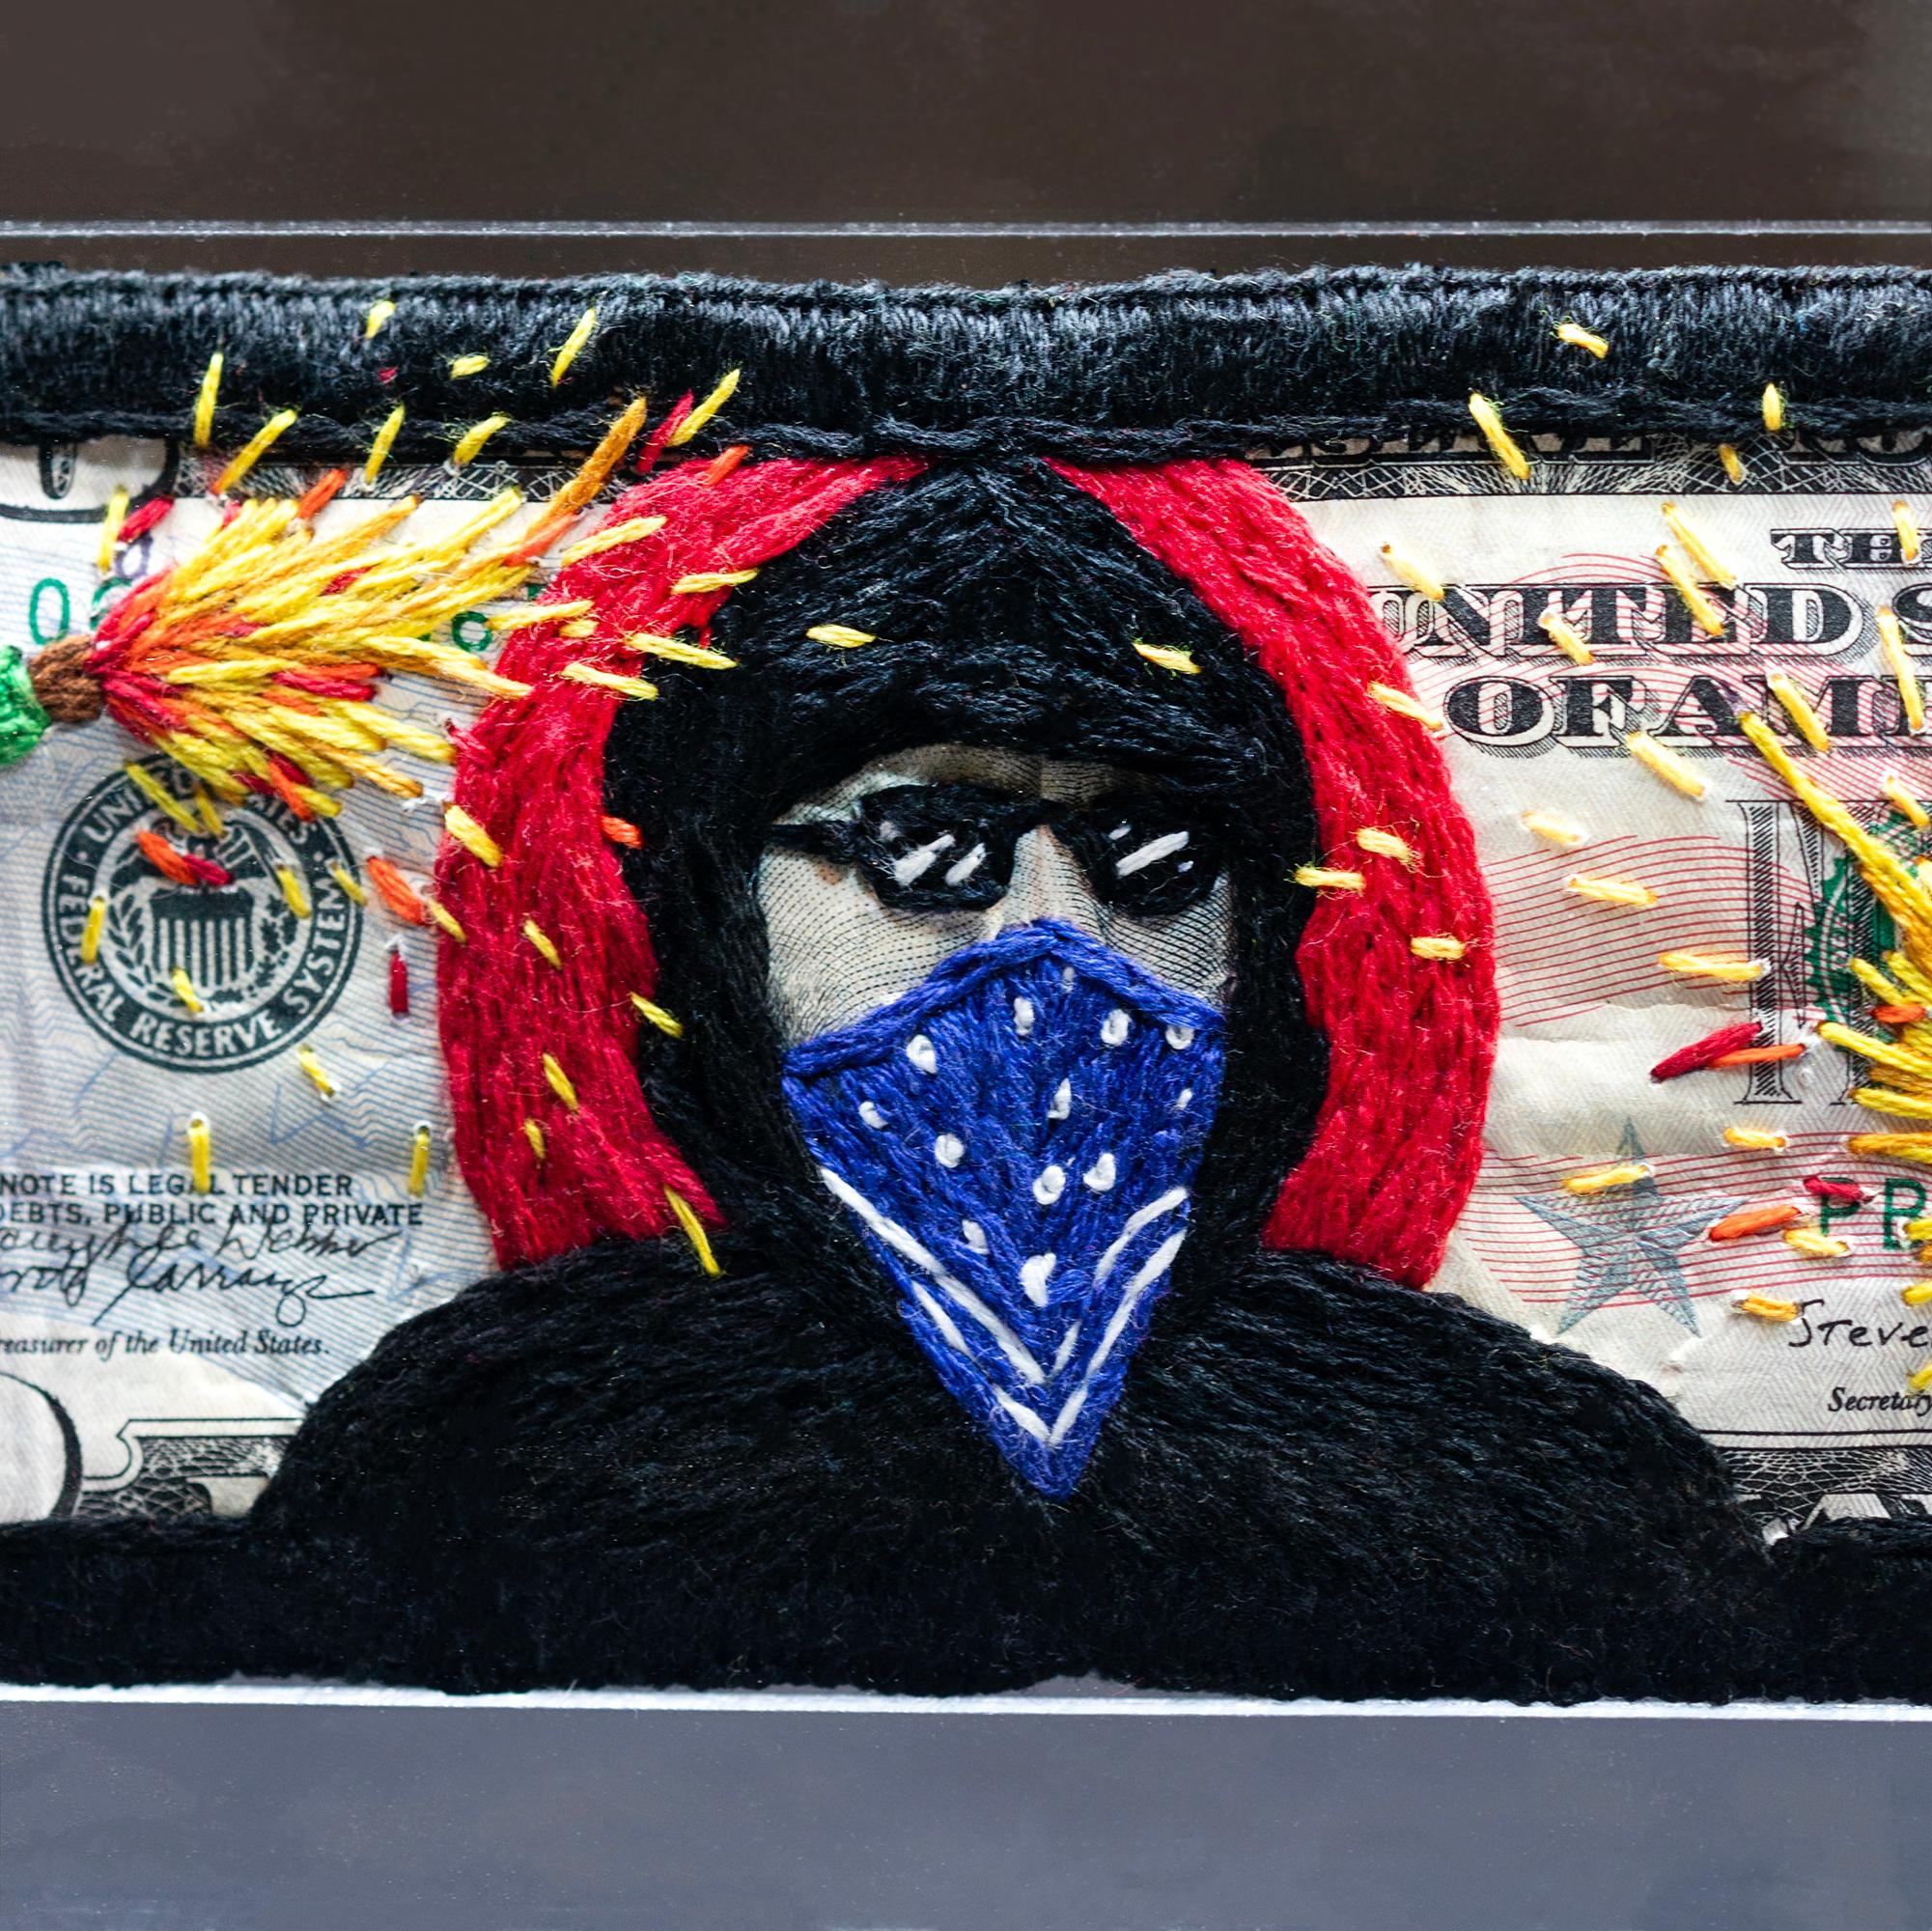 Grant Robber - Contemporary Mixed Media Art by Stacey Lee Webber